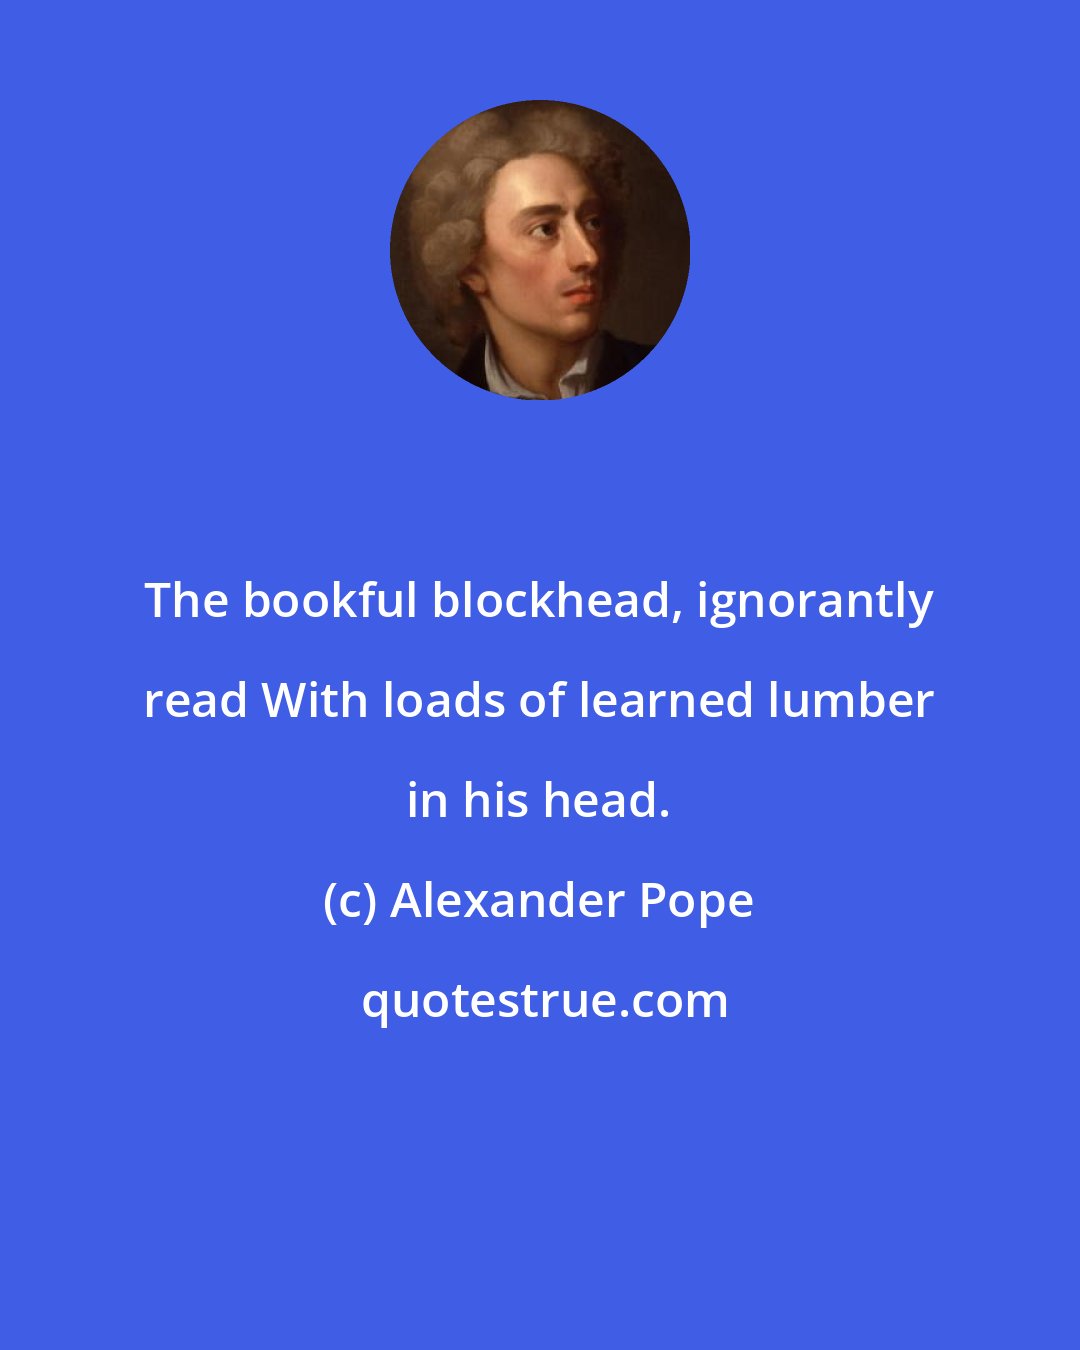 Alexander Pope: The bookful blockhead, ignorantly read With loads of learned lumber in his head.